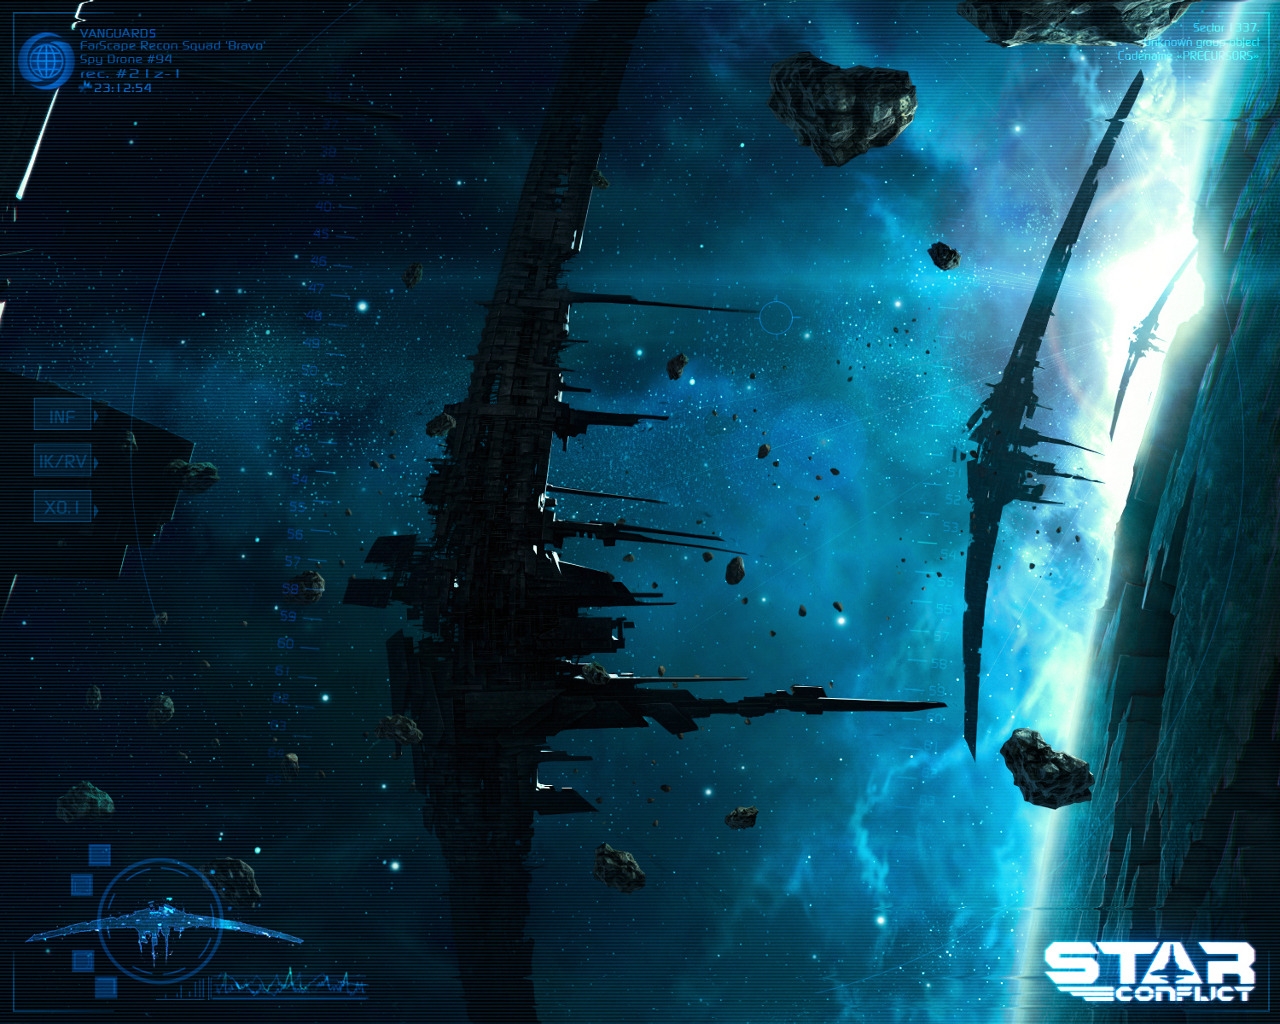 Star Conflict Game for 1280 x 1024 resolution